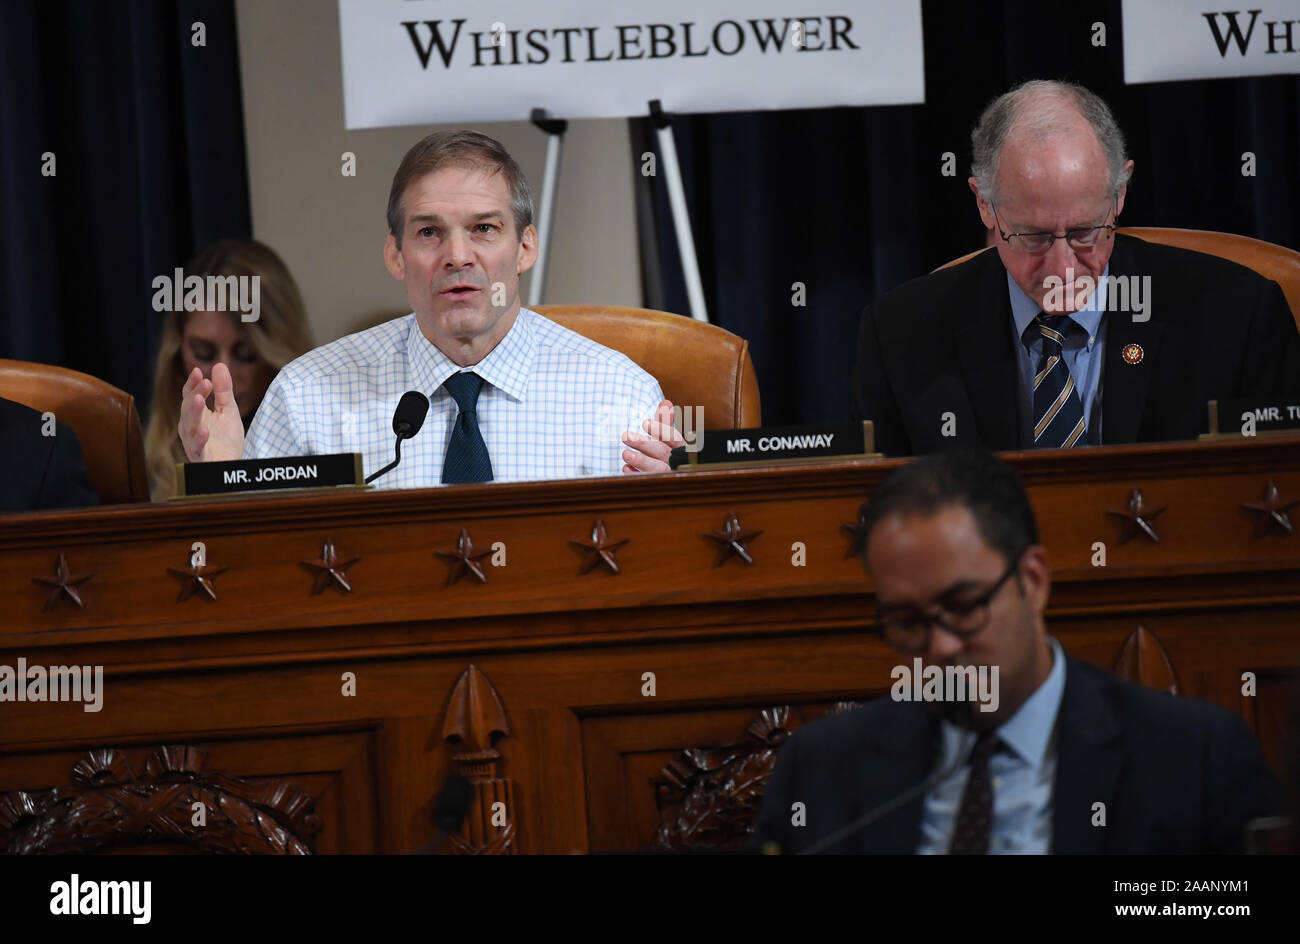 United States Representative Jim Jordan (Republican of Ohio) asks questions as David A. Holmes, Department of State political counselor for the US Embassy in Kyiv, Ukraine and Dr. Fiona Hill, former National Security Council senior director for Europe and Russia appear before the House Intelligence Committee during an impeachment inquiry hearing at the Longworth House Office Building on Thursday November 21, 2019 in Washington, DC. At right os US Representative Mike Conaway (Republican of Texas).Credit: Matt McClain/Pool via CNP | usage worldwide Stock Photo